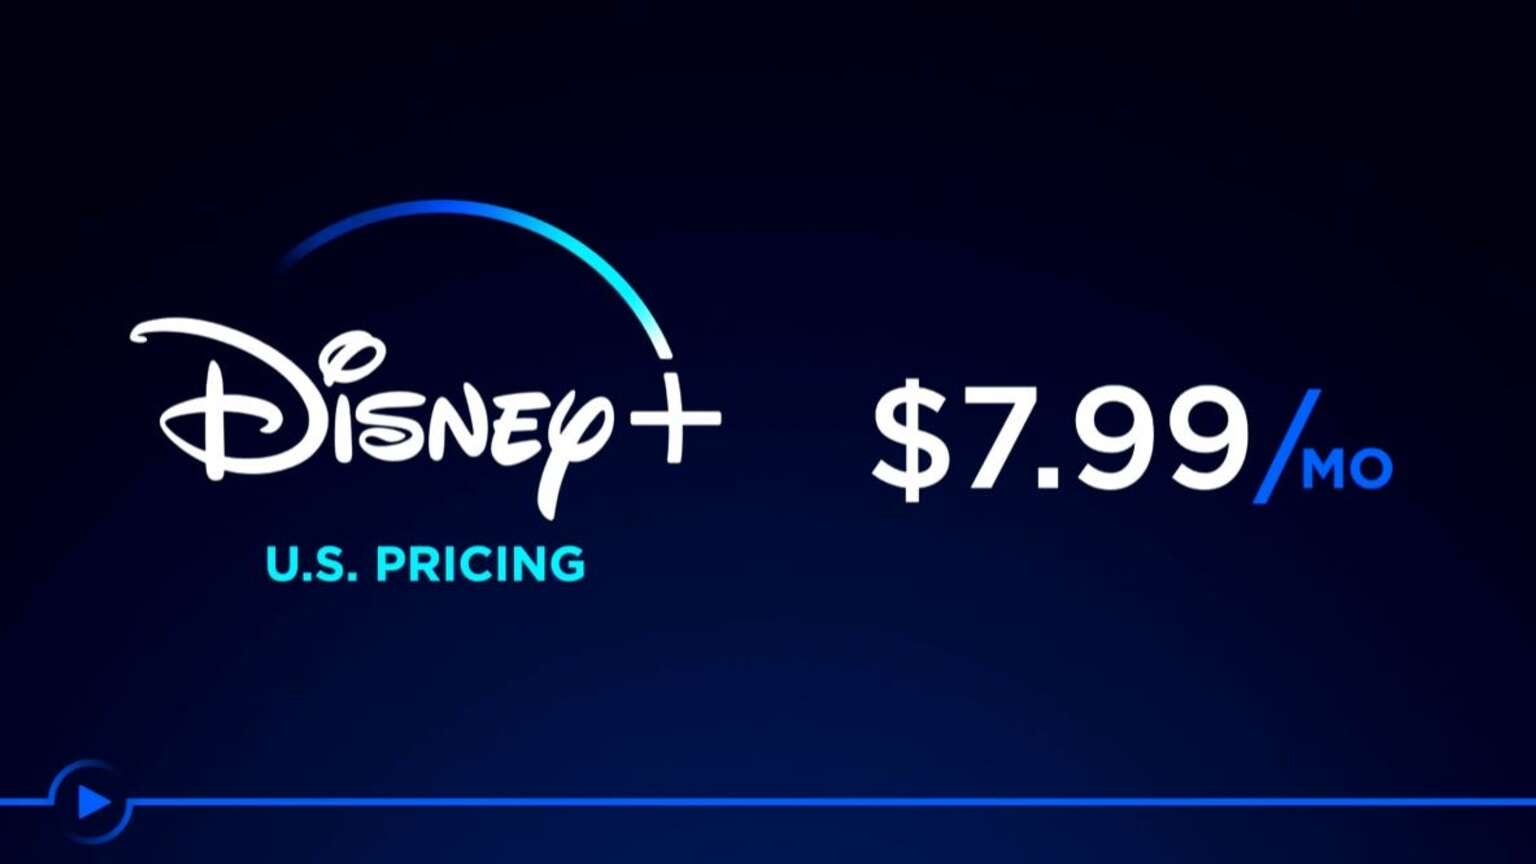 Disney to Raise Monthly Price to 7.99, Annual Price to 79.99, and